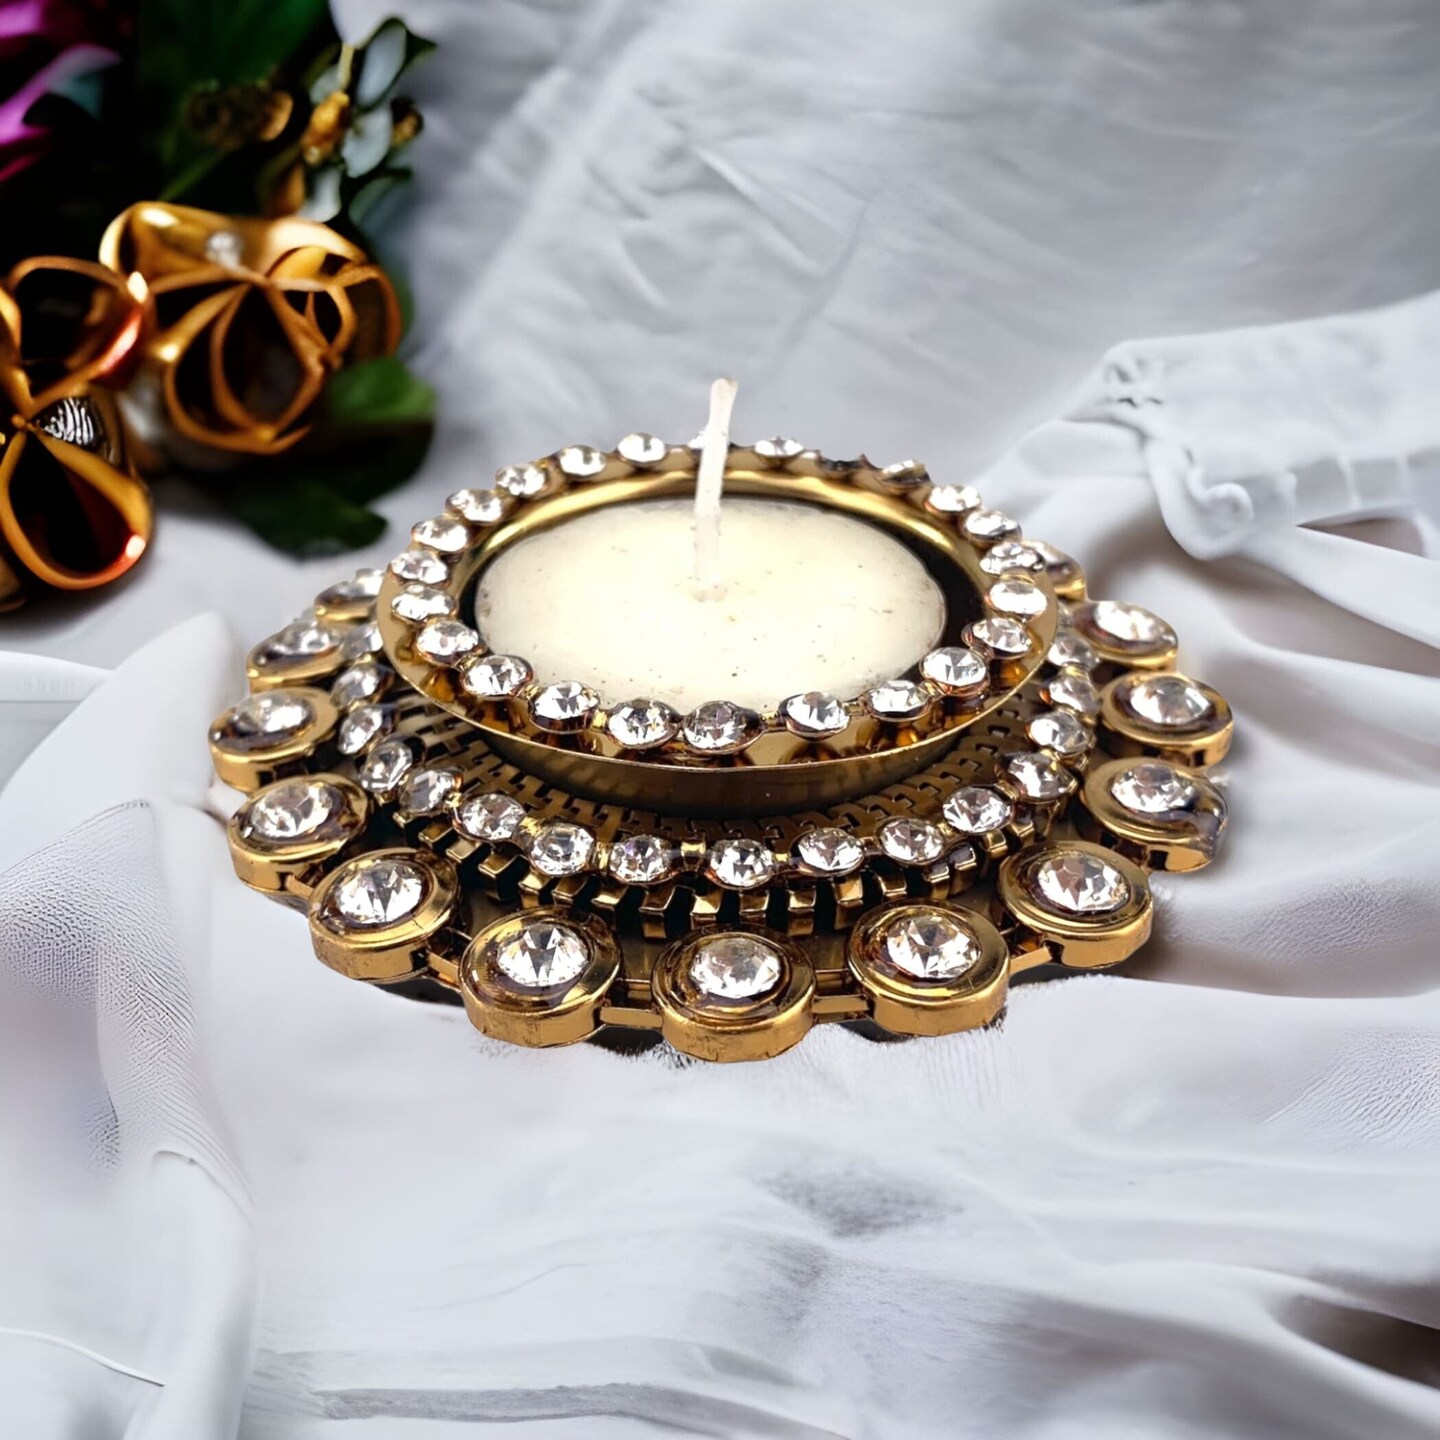 Candle Holder T-light Holder Candle Stand Tealight Diwali Diya Holders For Indian Festival Decorations Lighting Accessories Navratri Varalaxmi Wedding Pooja Home New Year Decor